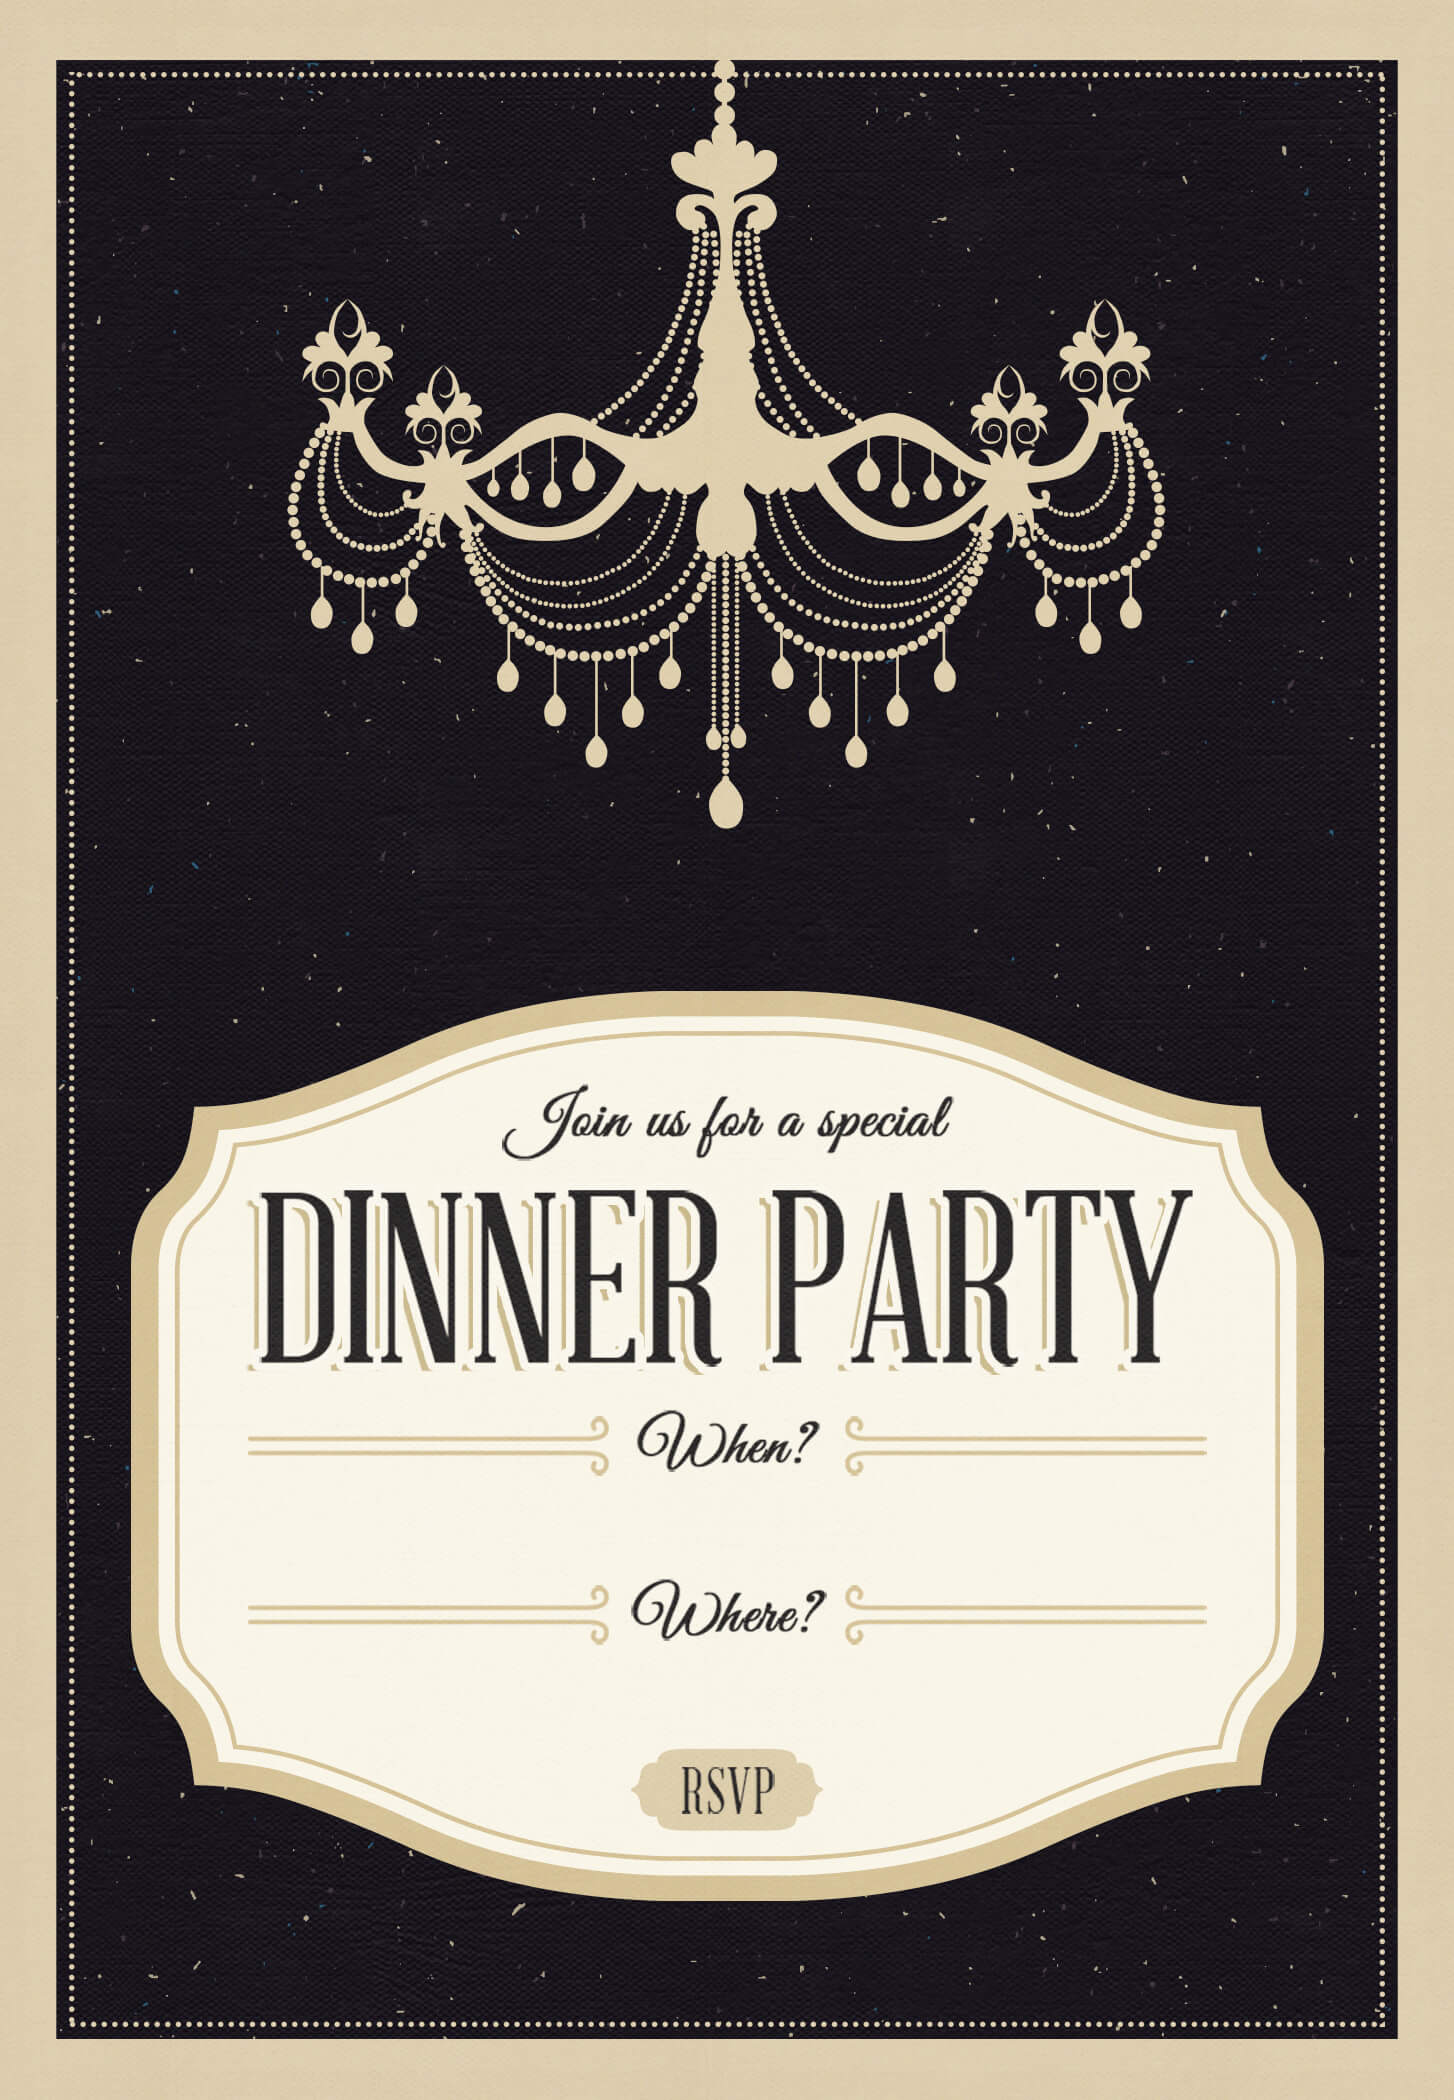 006 Free Dinner Invitation Templates Template Amazing Ideas Intended For Free Dinner Invitation Templates For Word